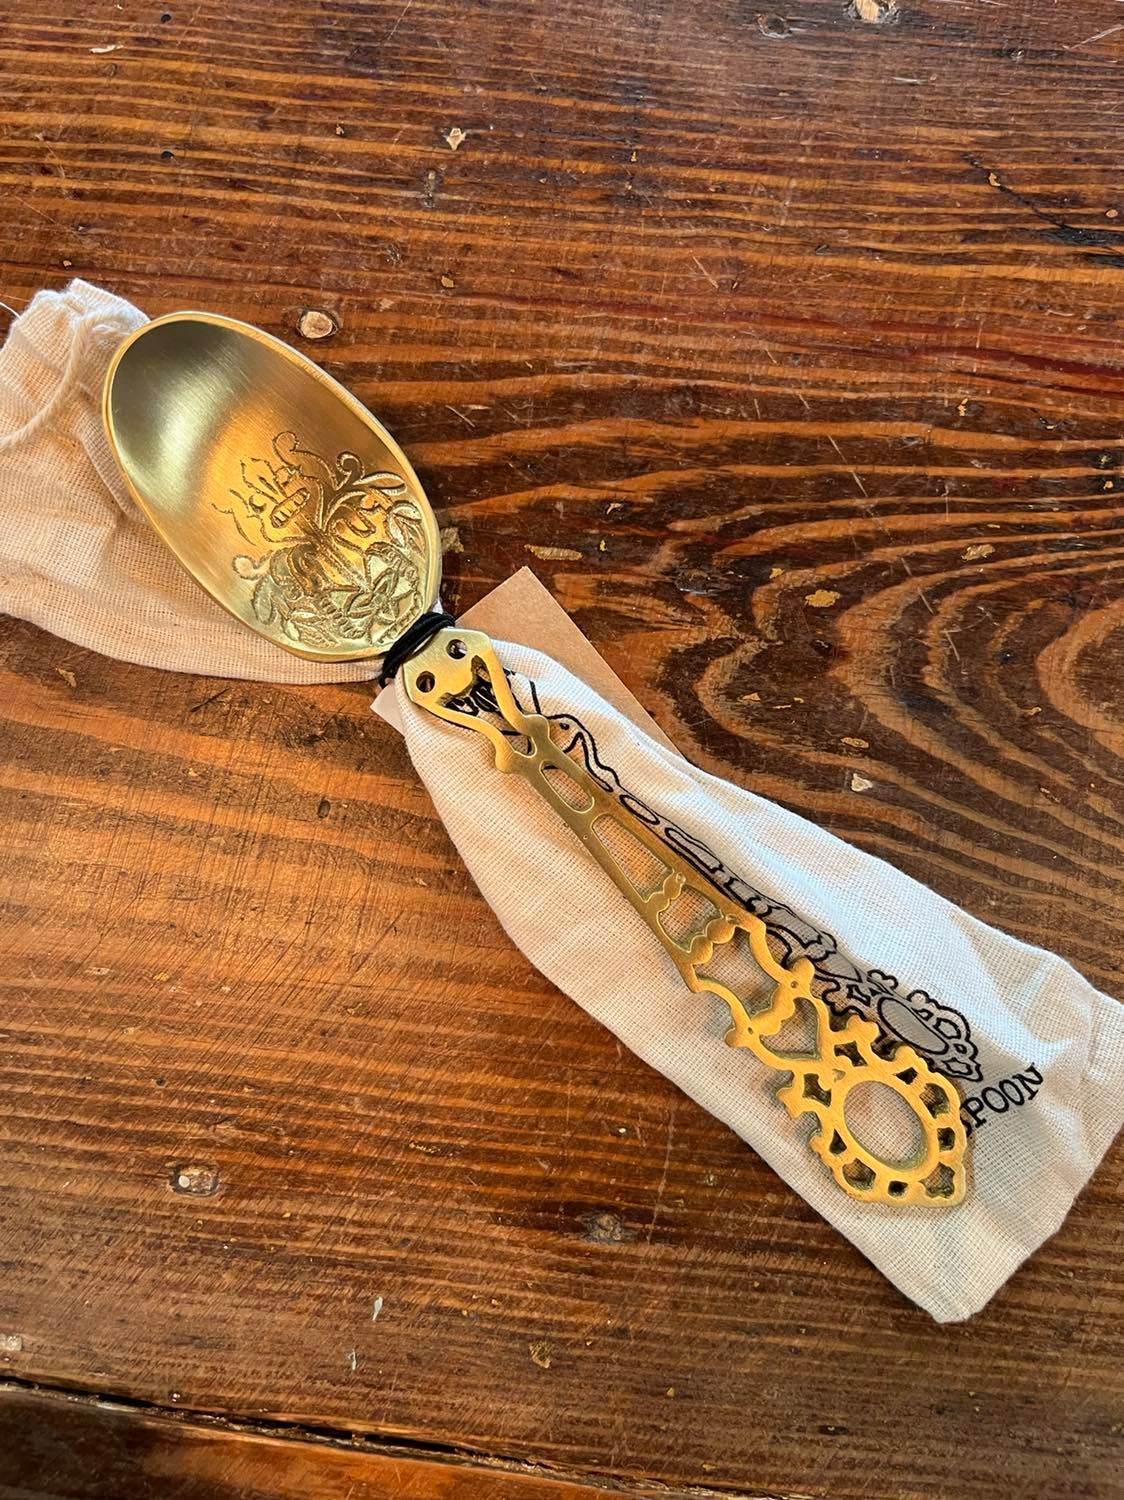 Doily Brass Serving Spoon in Bag